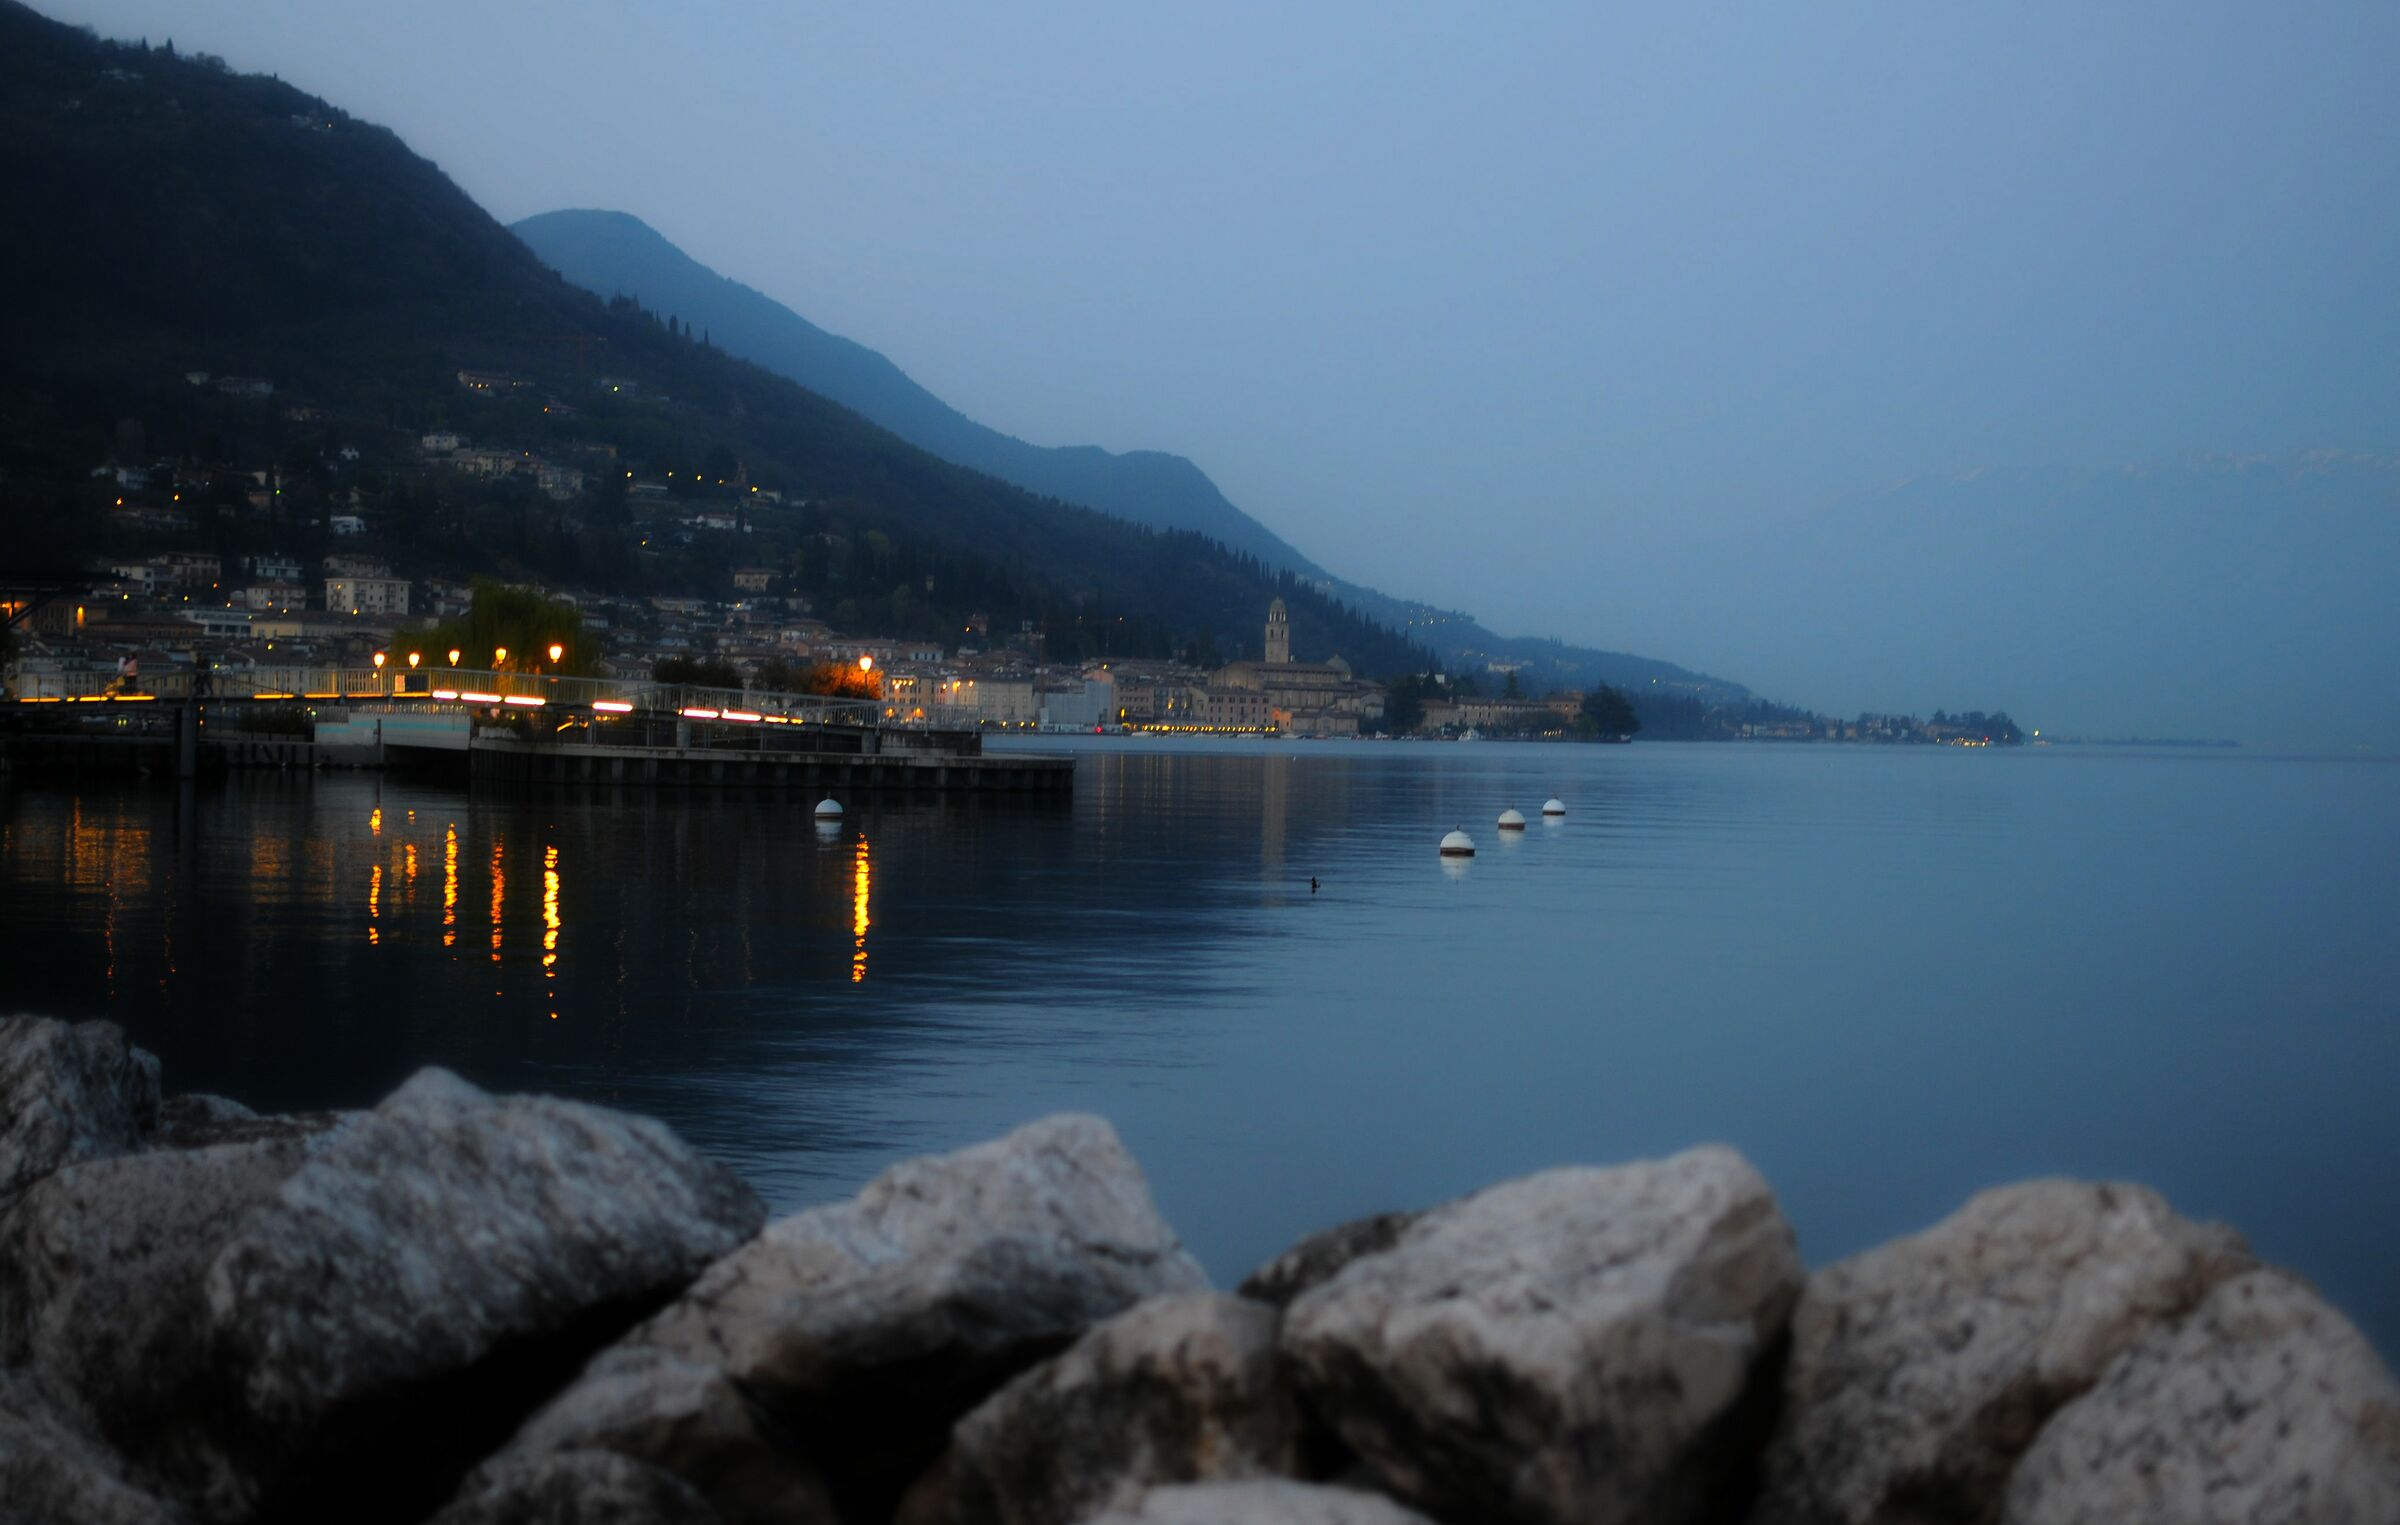 In The evening, at the Gulf of Salò ...